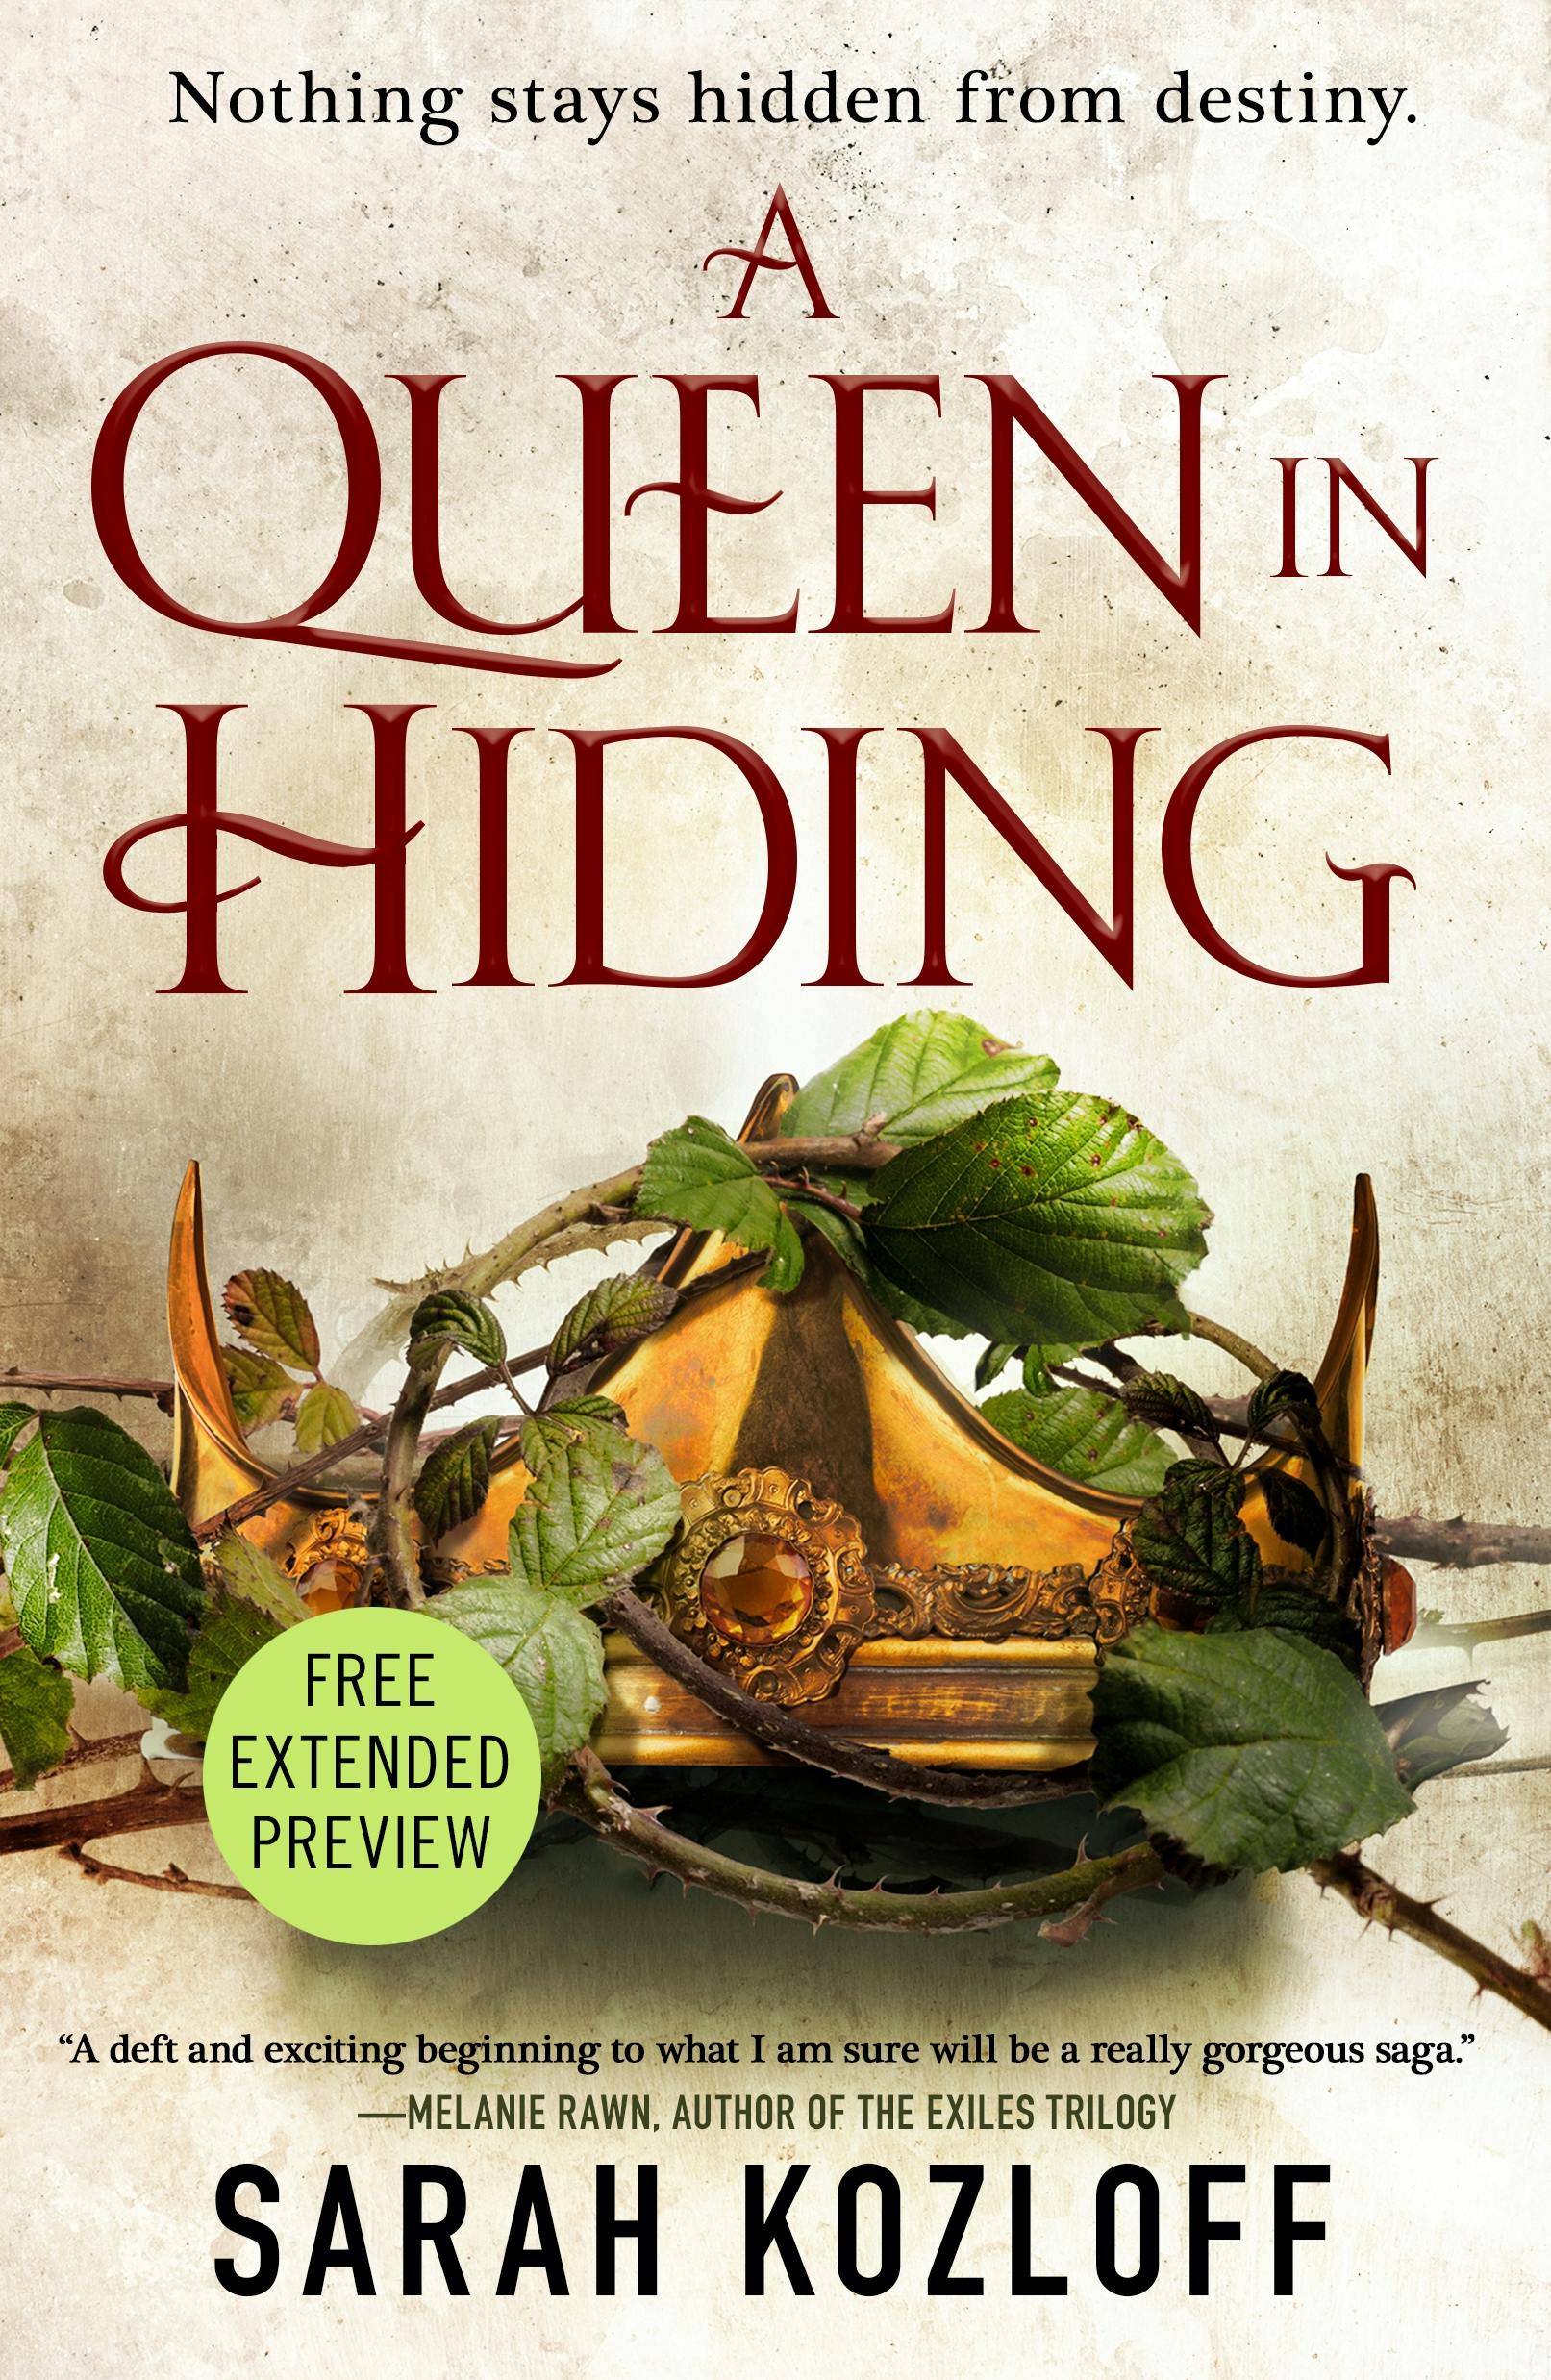 Cover for the book titled as: A Queen in Hiding Sneak Peek